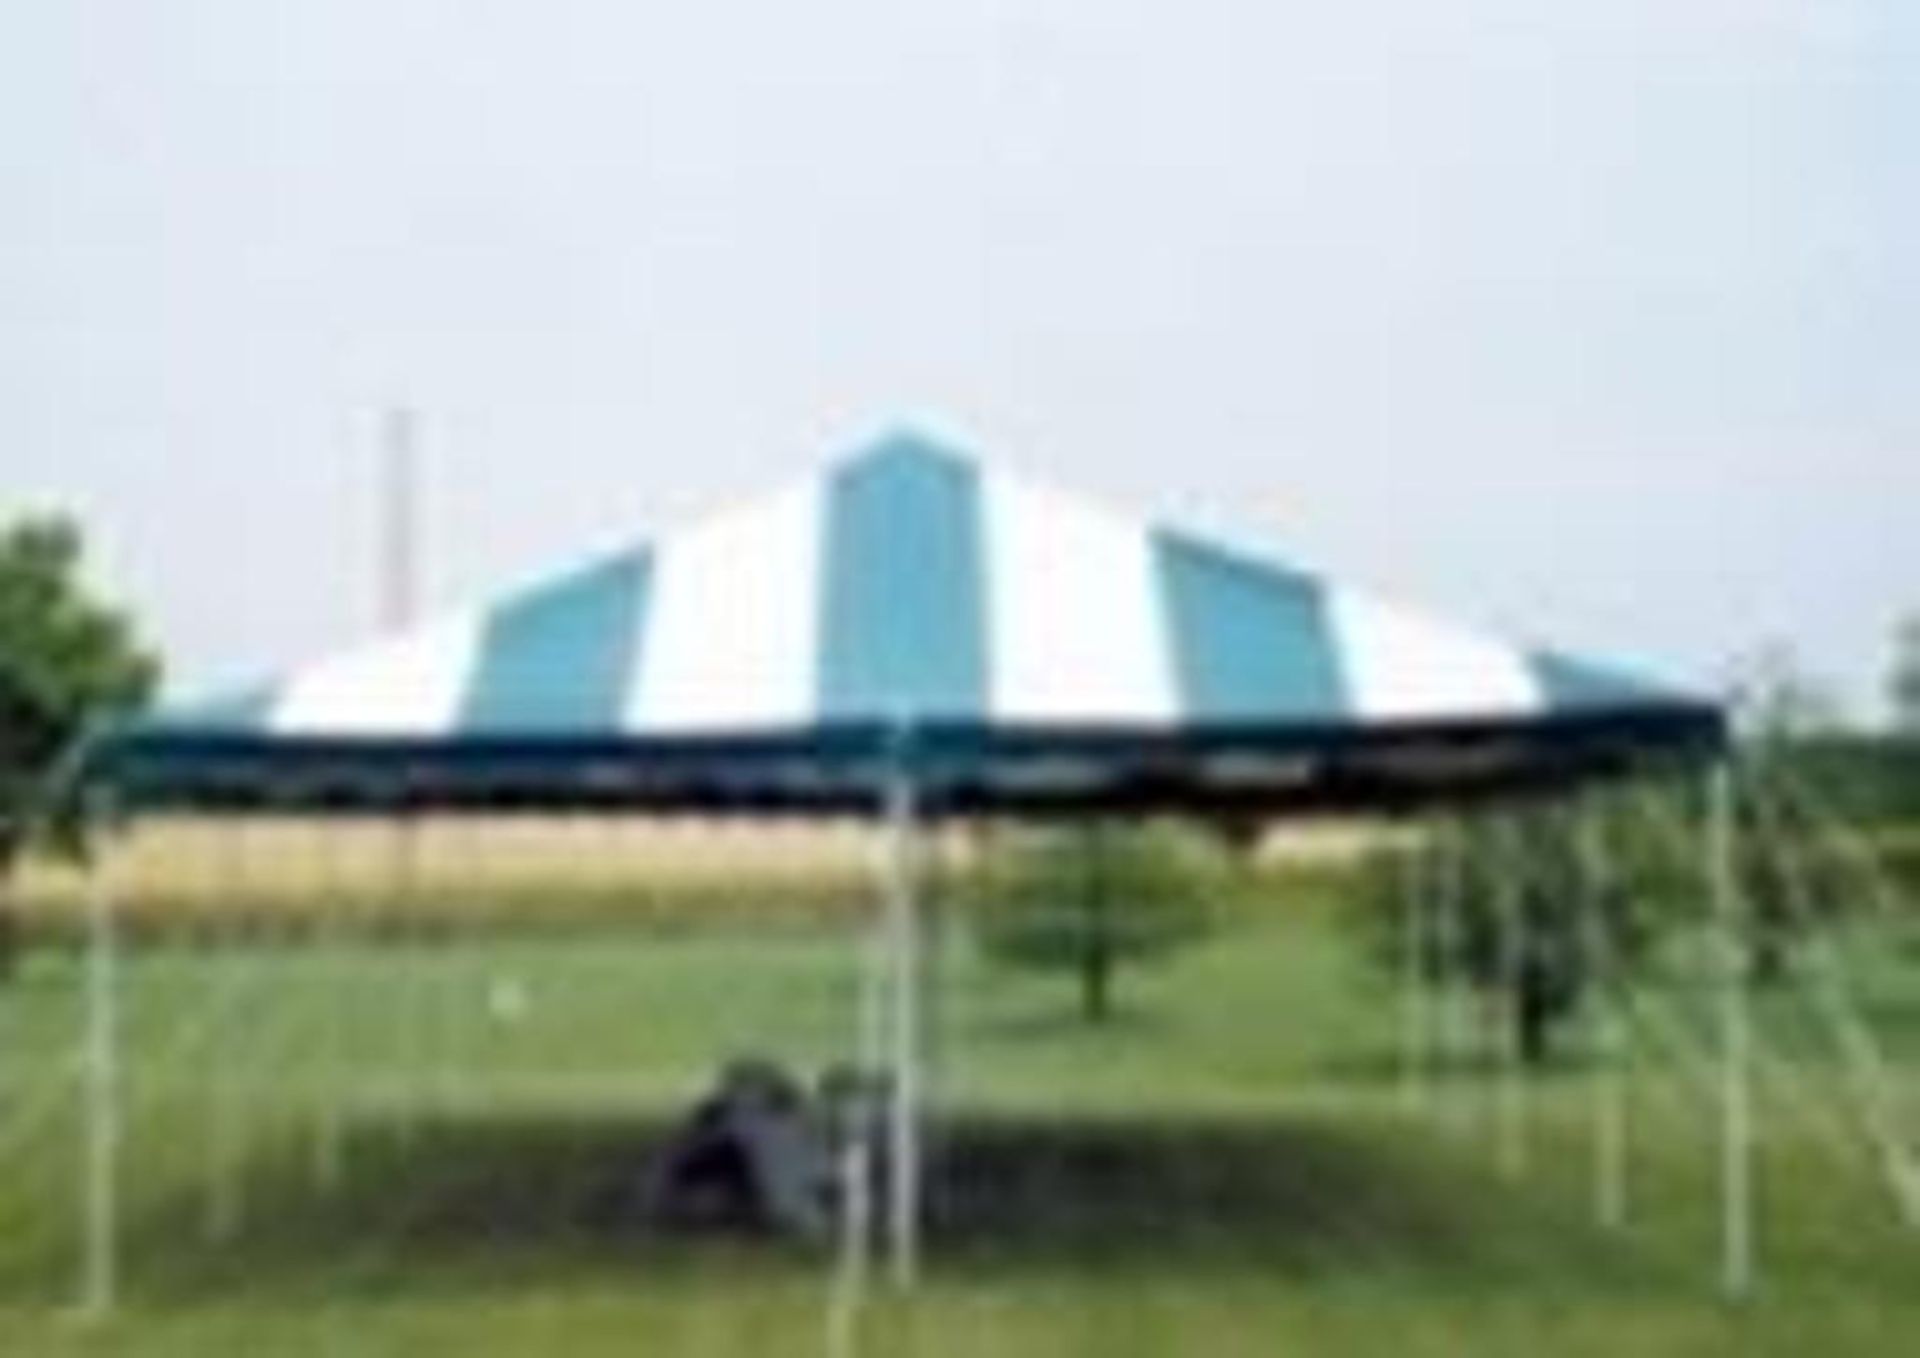 Anchor 20' x 40' green and white canopy, canopy only, has repairable tear